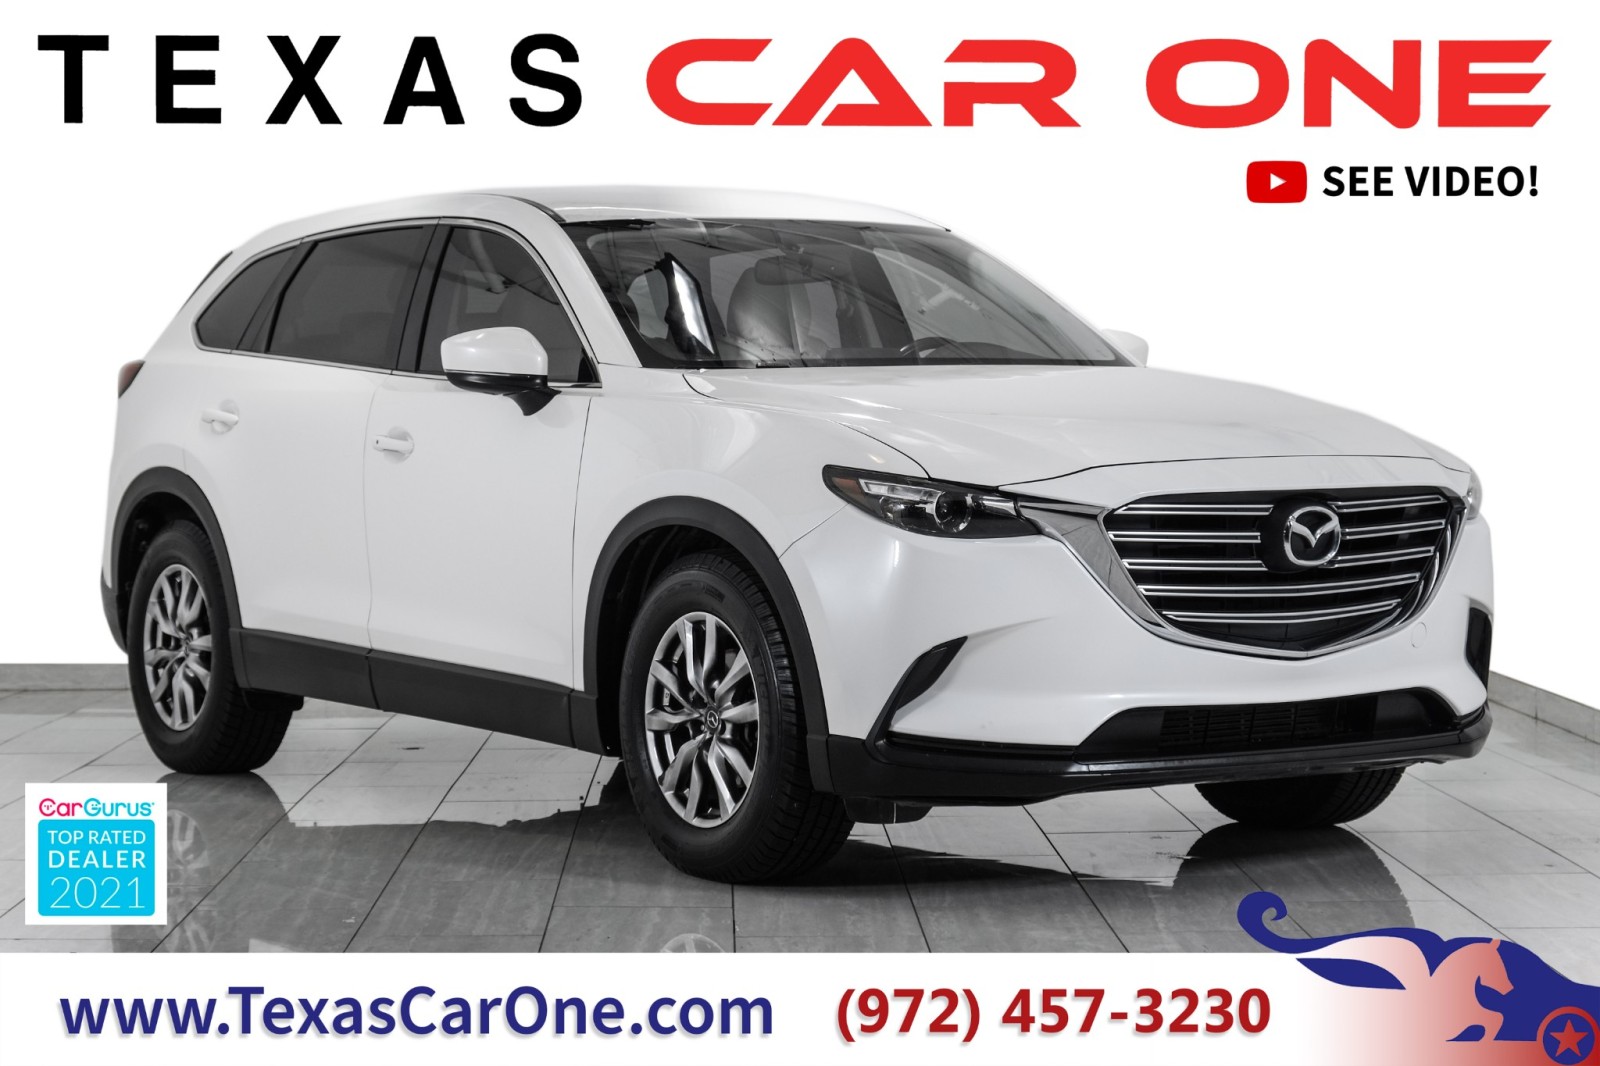 2016 Mazda CX-9 TOURING BLIND SPOT ASSIT LEATHER HEATED SEATS REAR 1